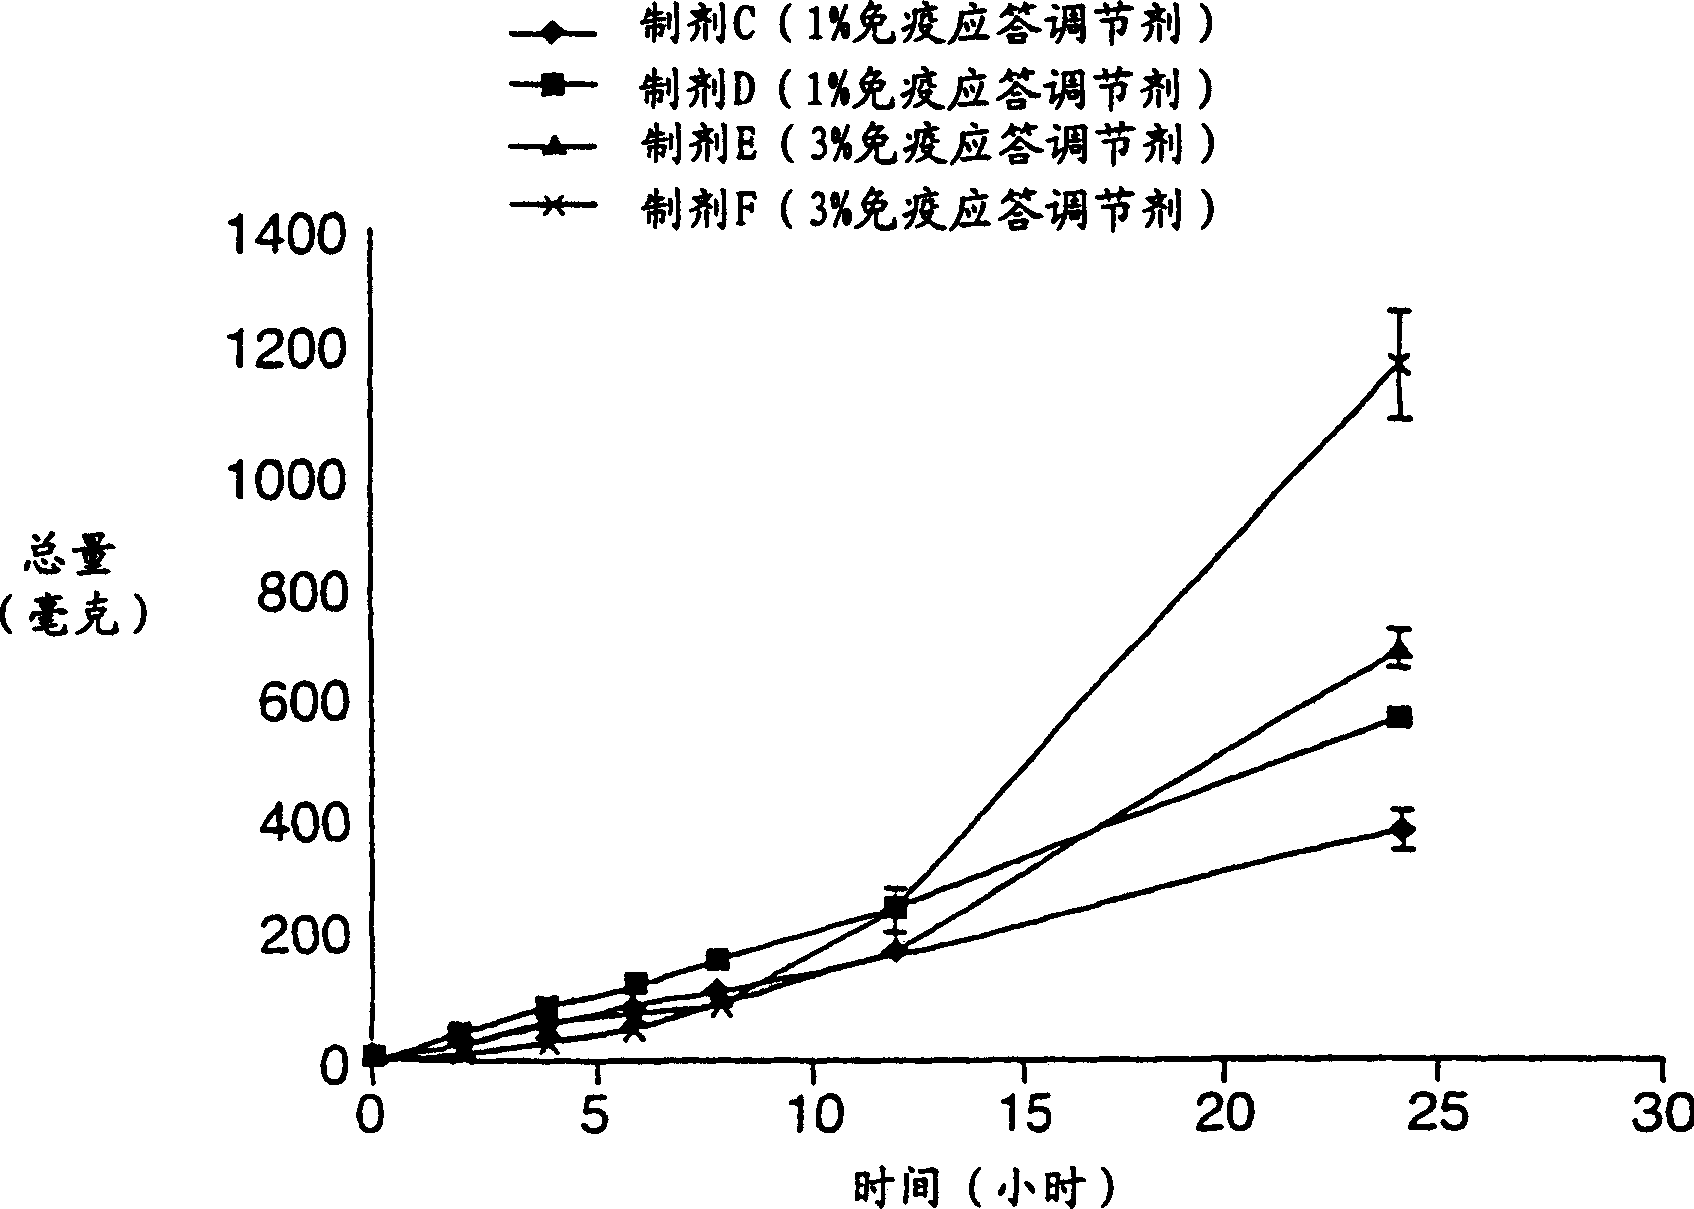 Formulations  for treatment of mucosal associated conditions with an immune response modifier